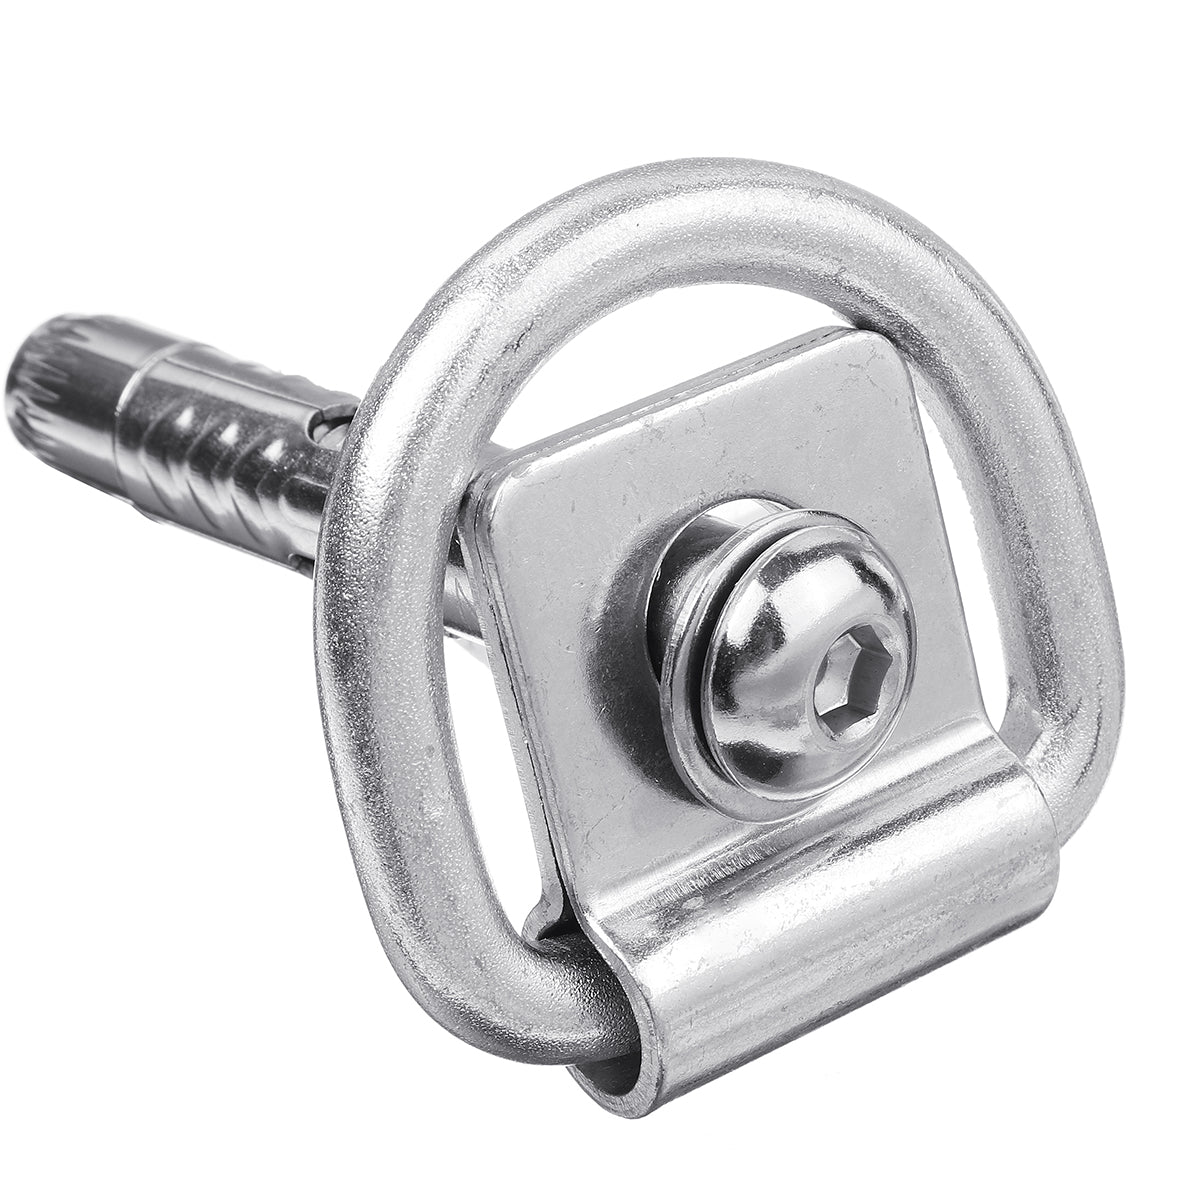 Gray Motorcycles Ground Safety Lock Stainless Steel Motorcycle Parking Lock Silver